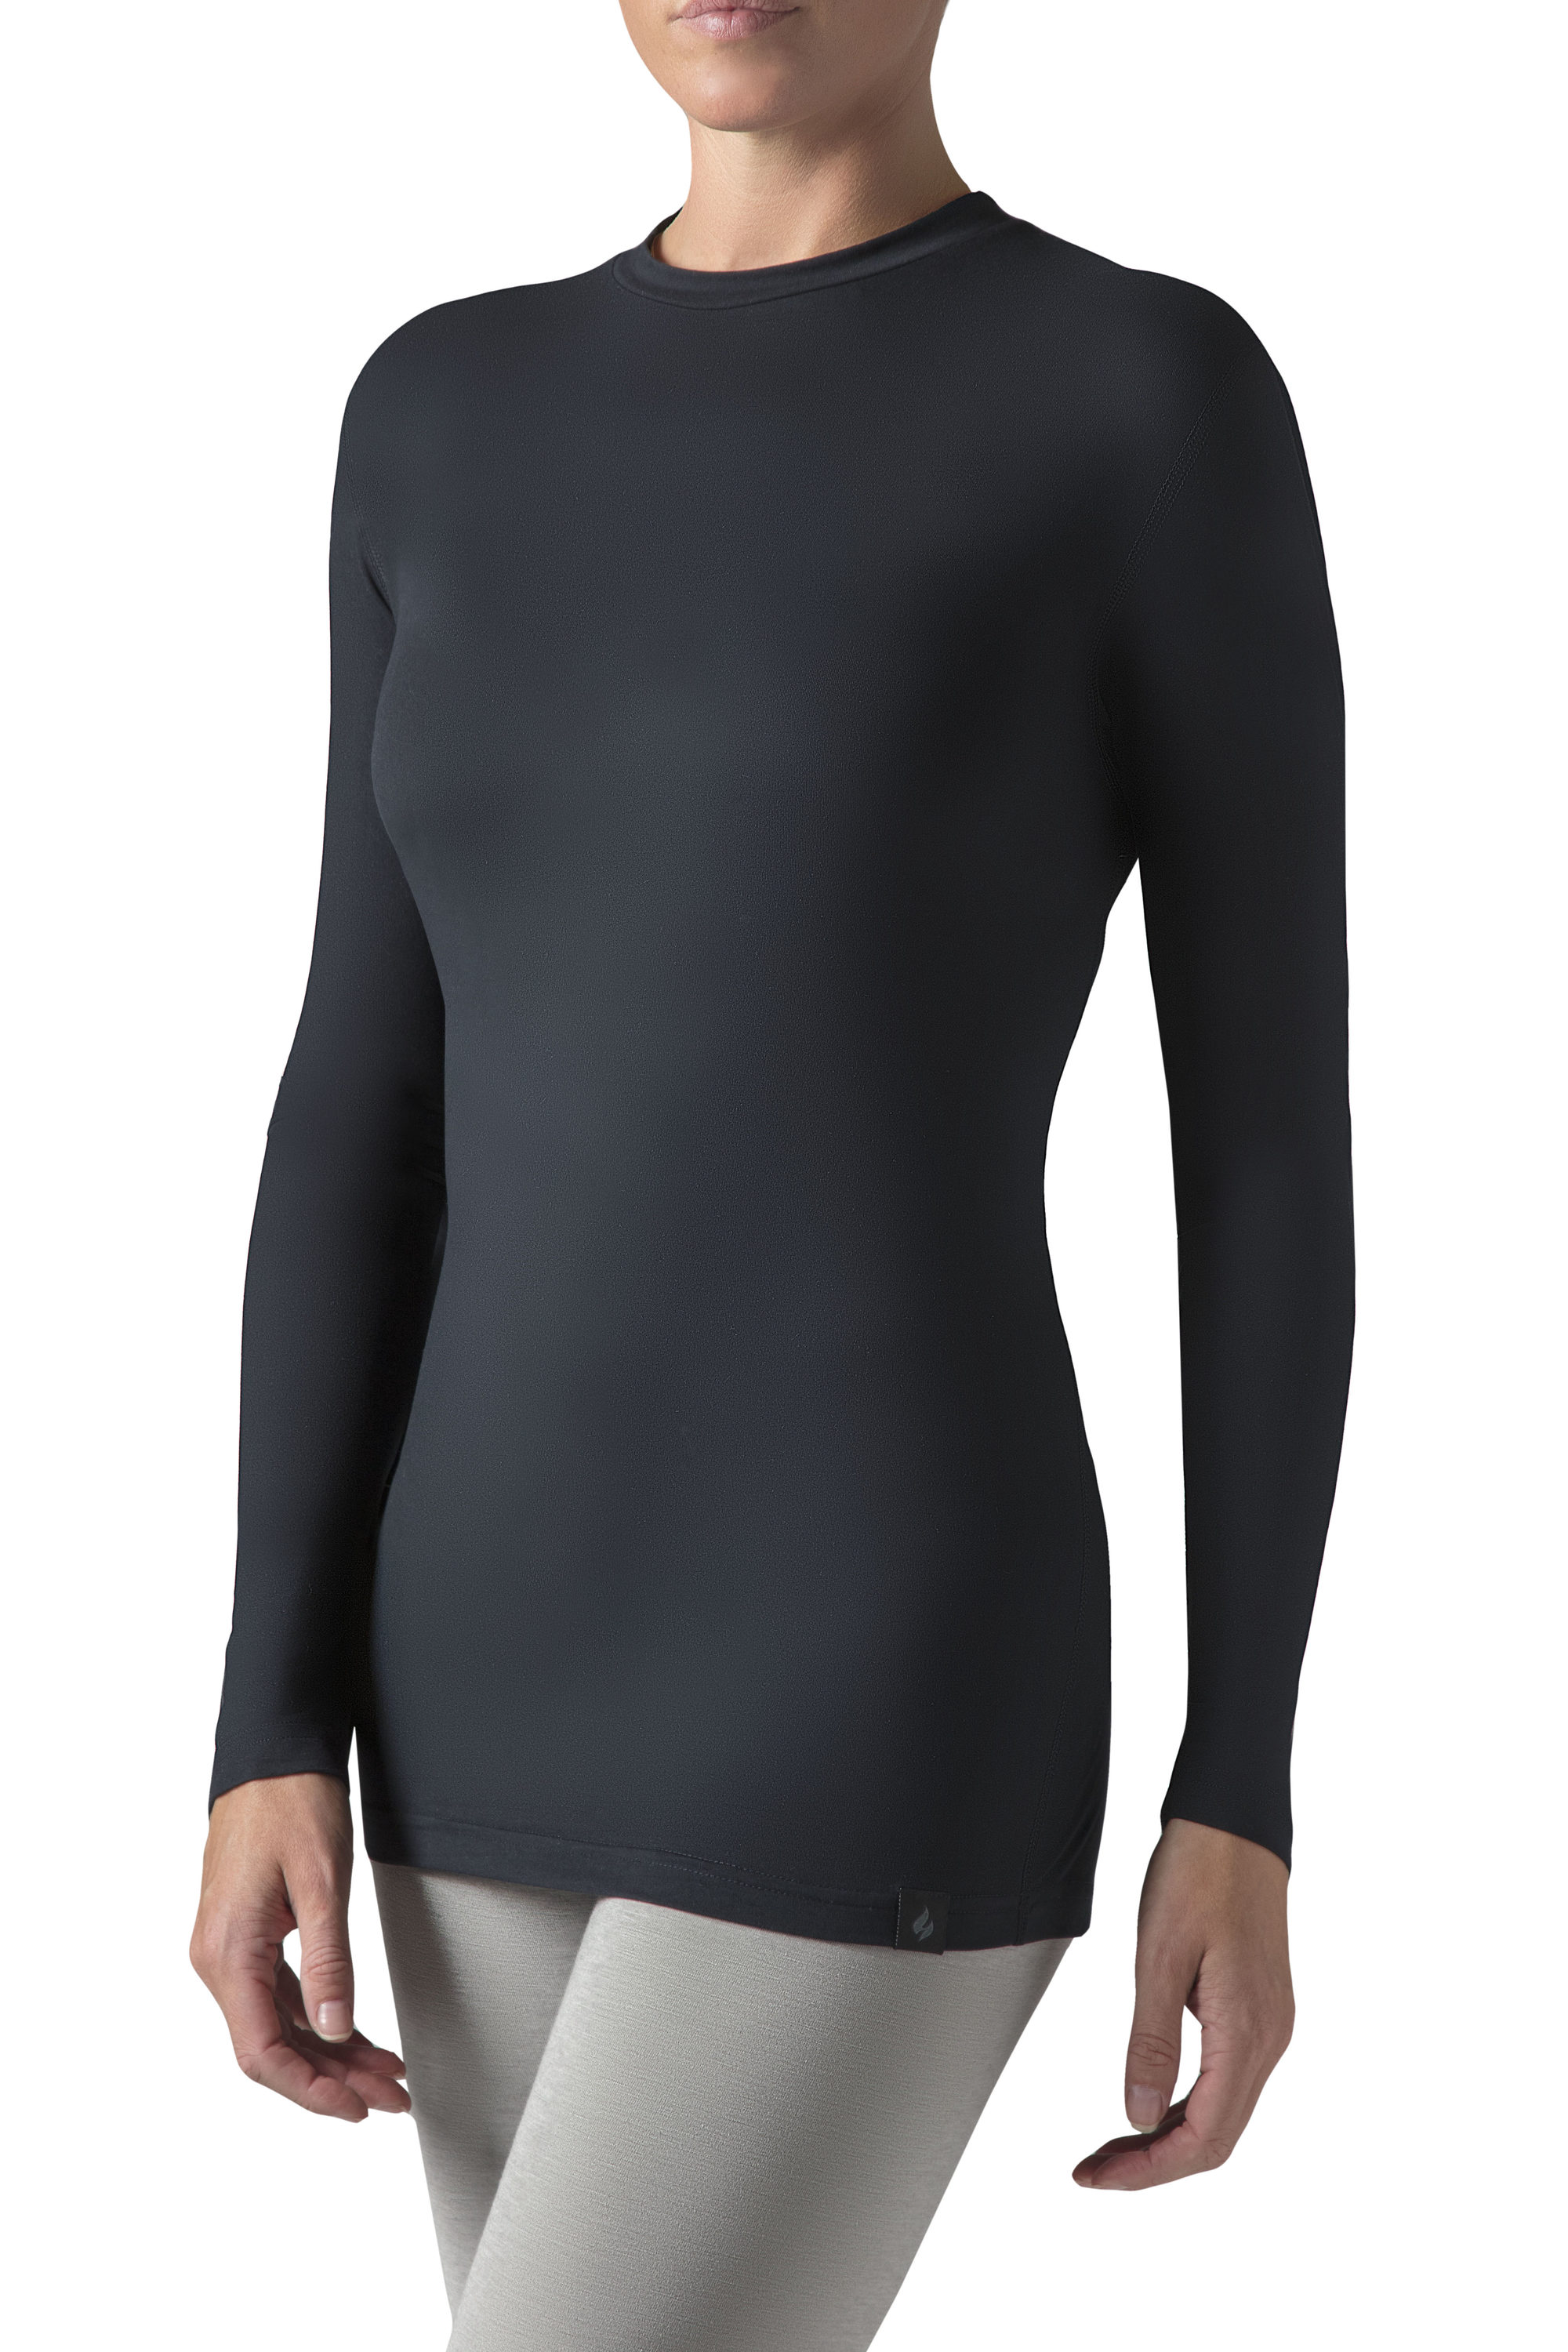 Heat Holders Black Polyester Thermal Base Layer (Large) in the Thermals  department at